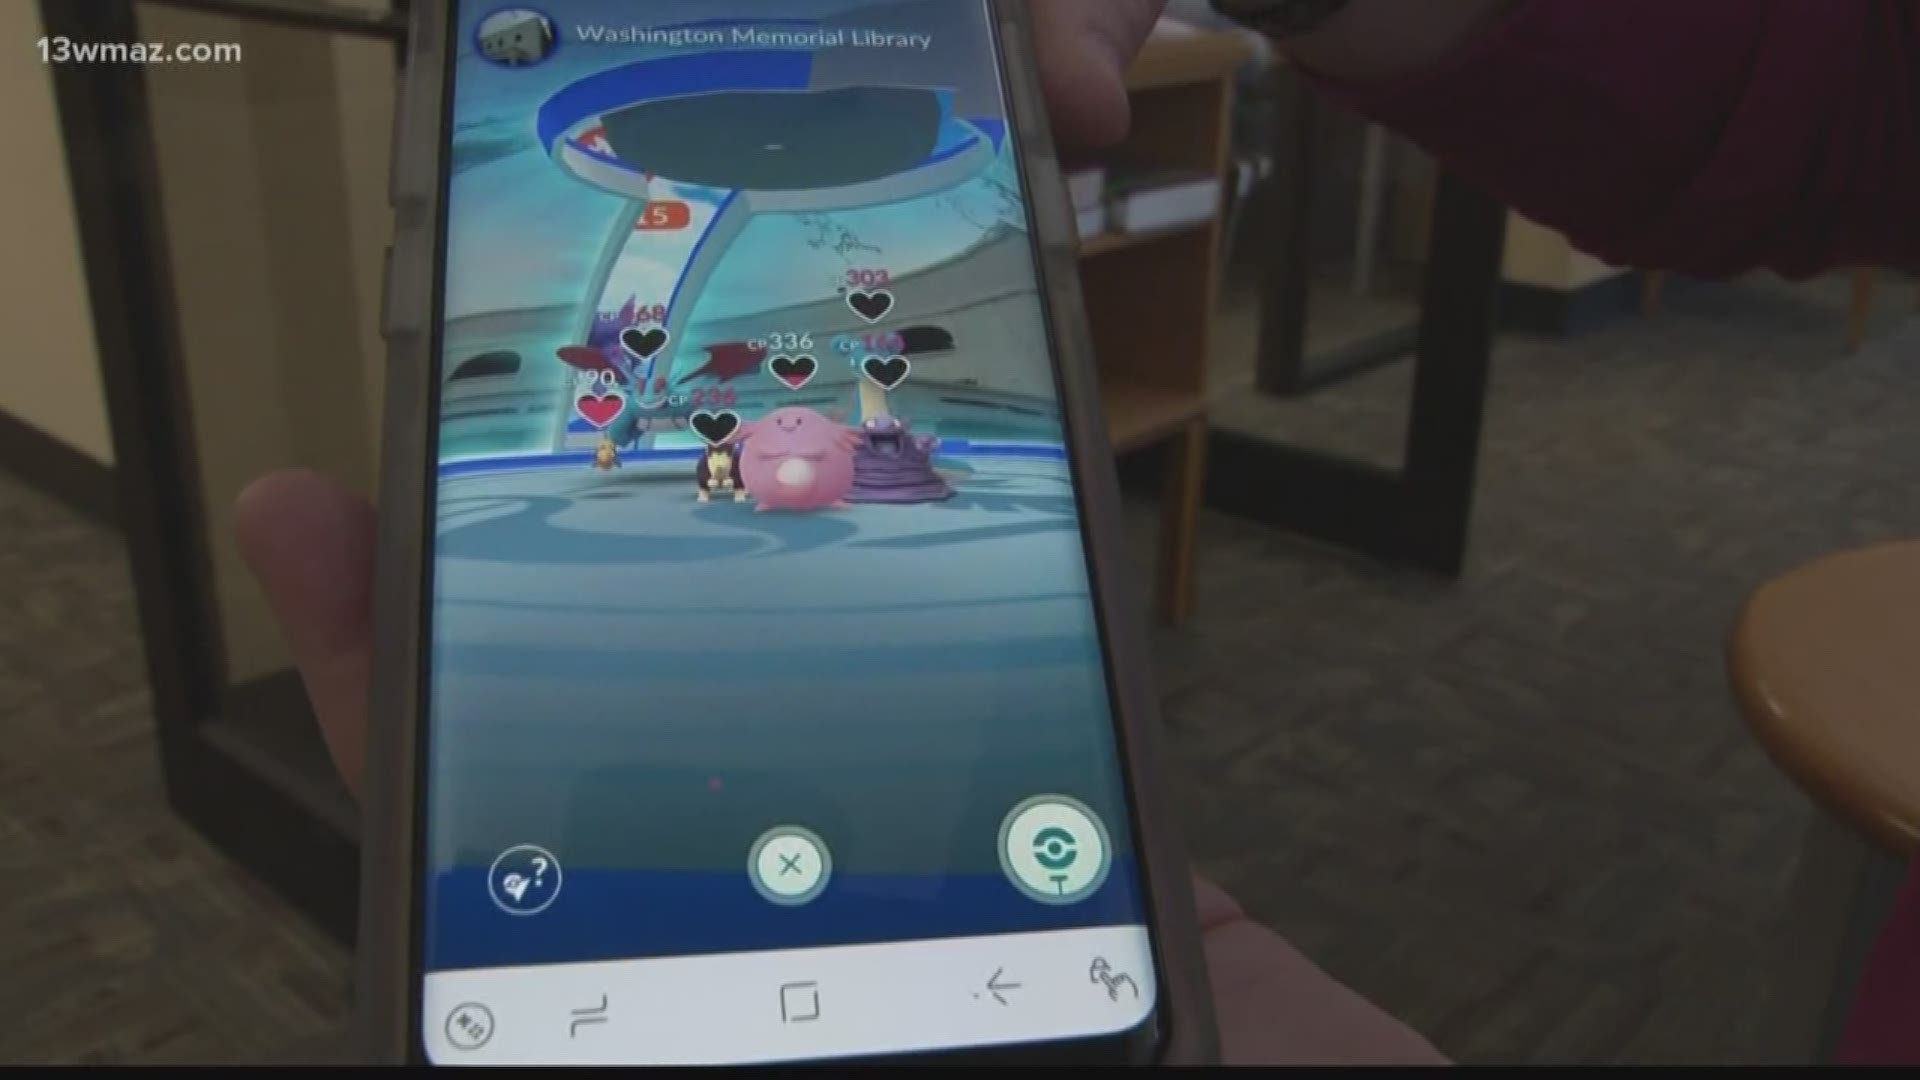 There will be new PokeStops and other in-game surprises at the event aimed at expanding AR